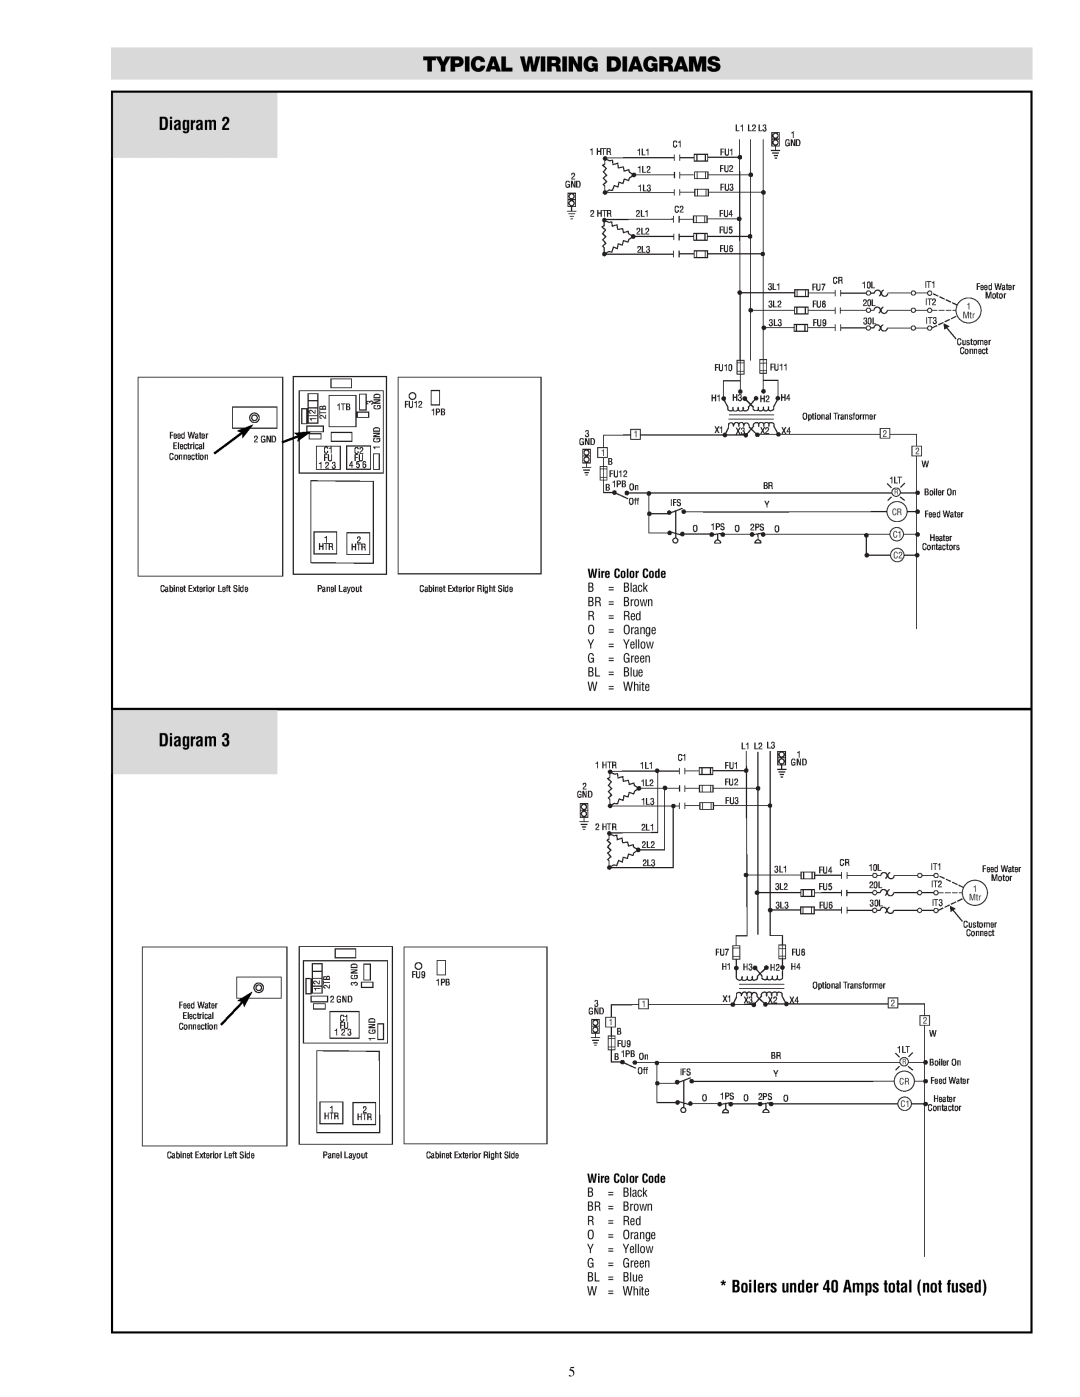 Chromalox CHPES-6A manual Typical Wiring Diagrams, Boilers under 40 Amps total not fused, Wire Color Code 